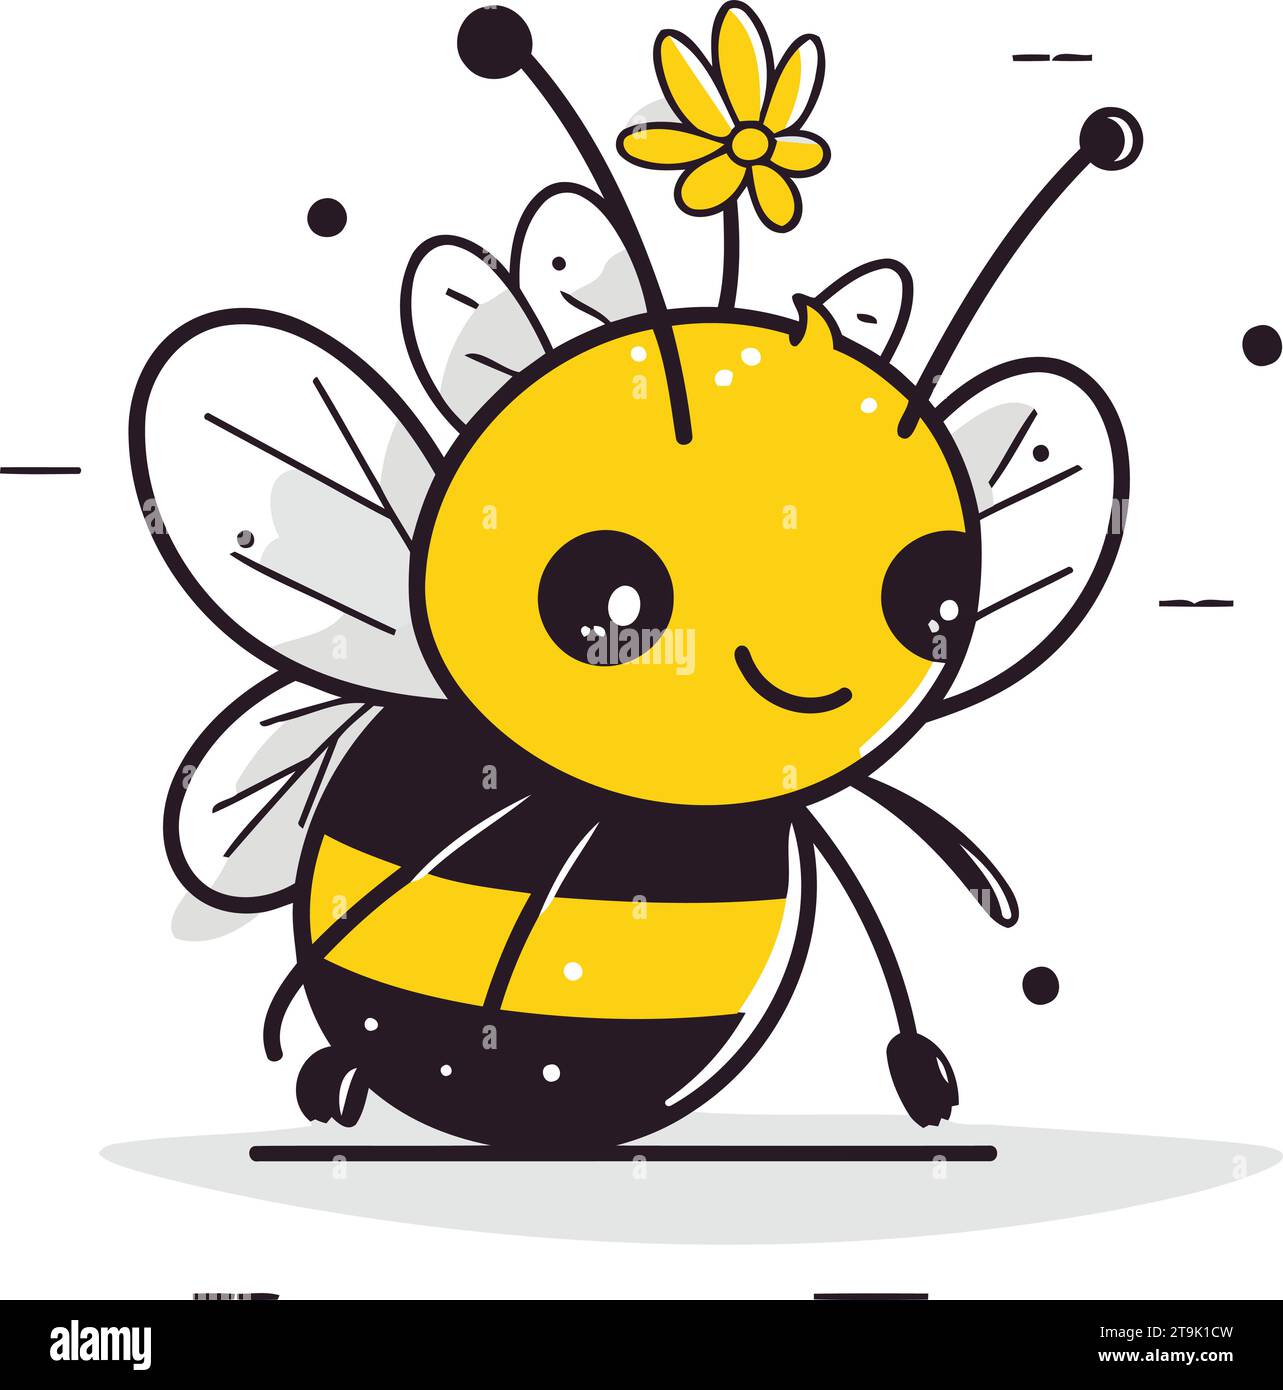 https://c8.alamy.com/comp/2T9K1CW/cute-cartoon-bee-with-flower-vector-illustration-in-flat-style-2T9K1CW.jpg